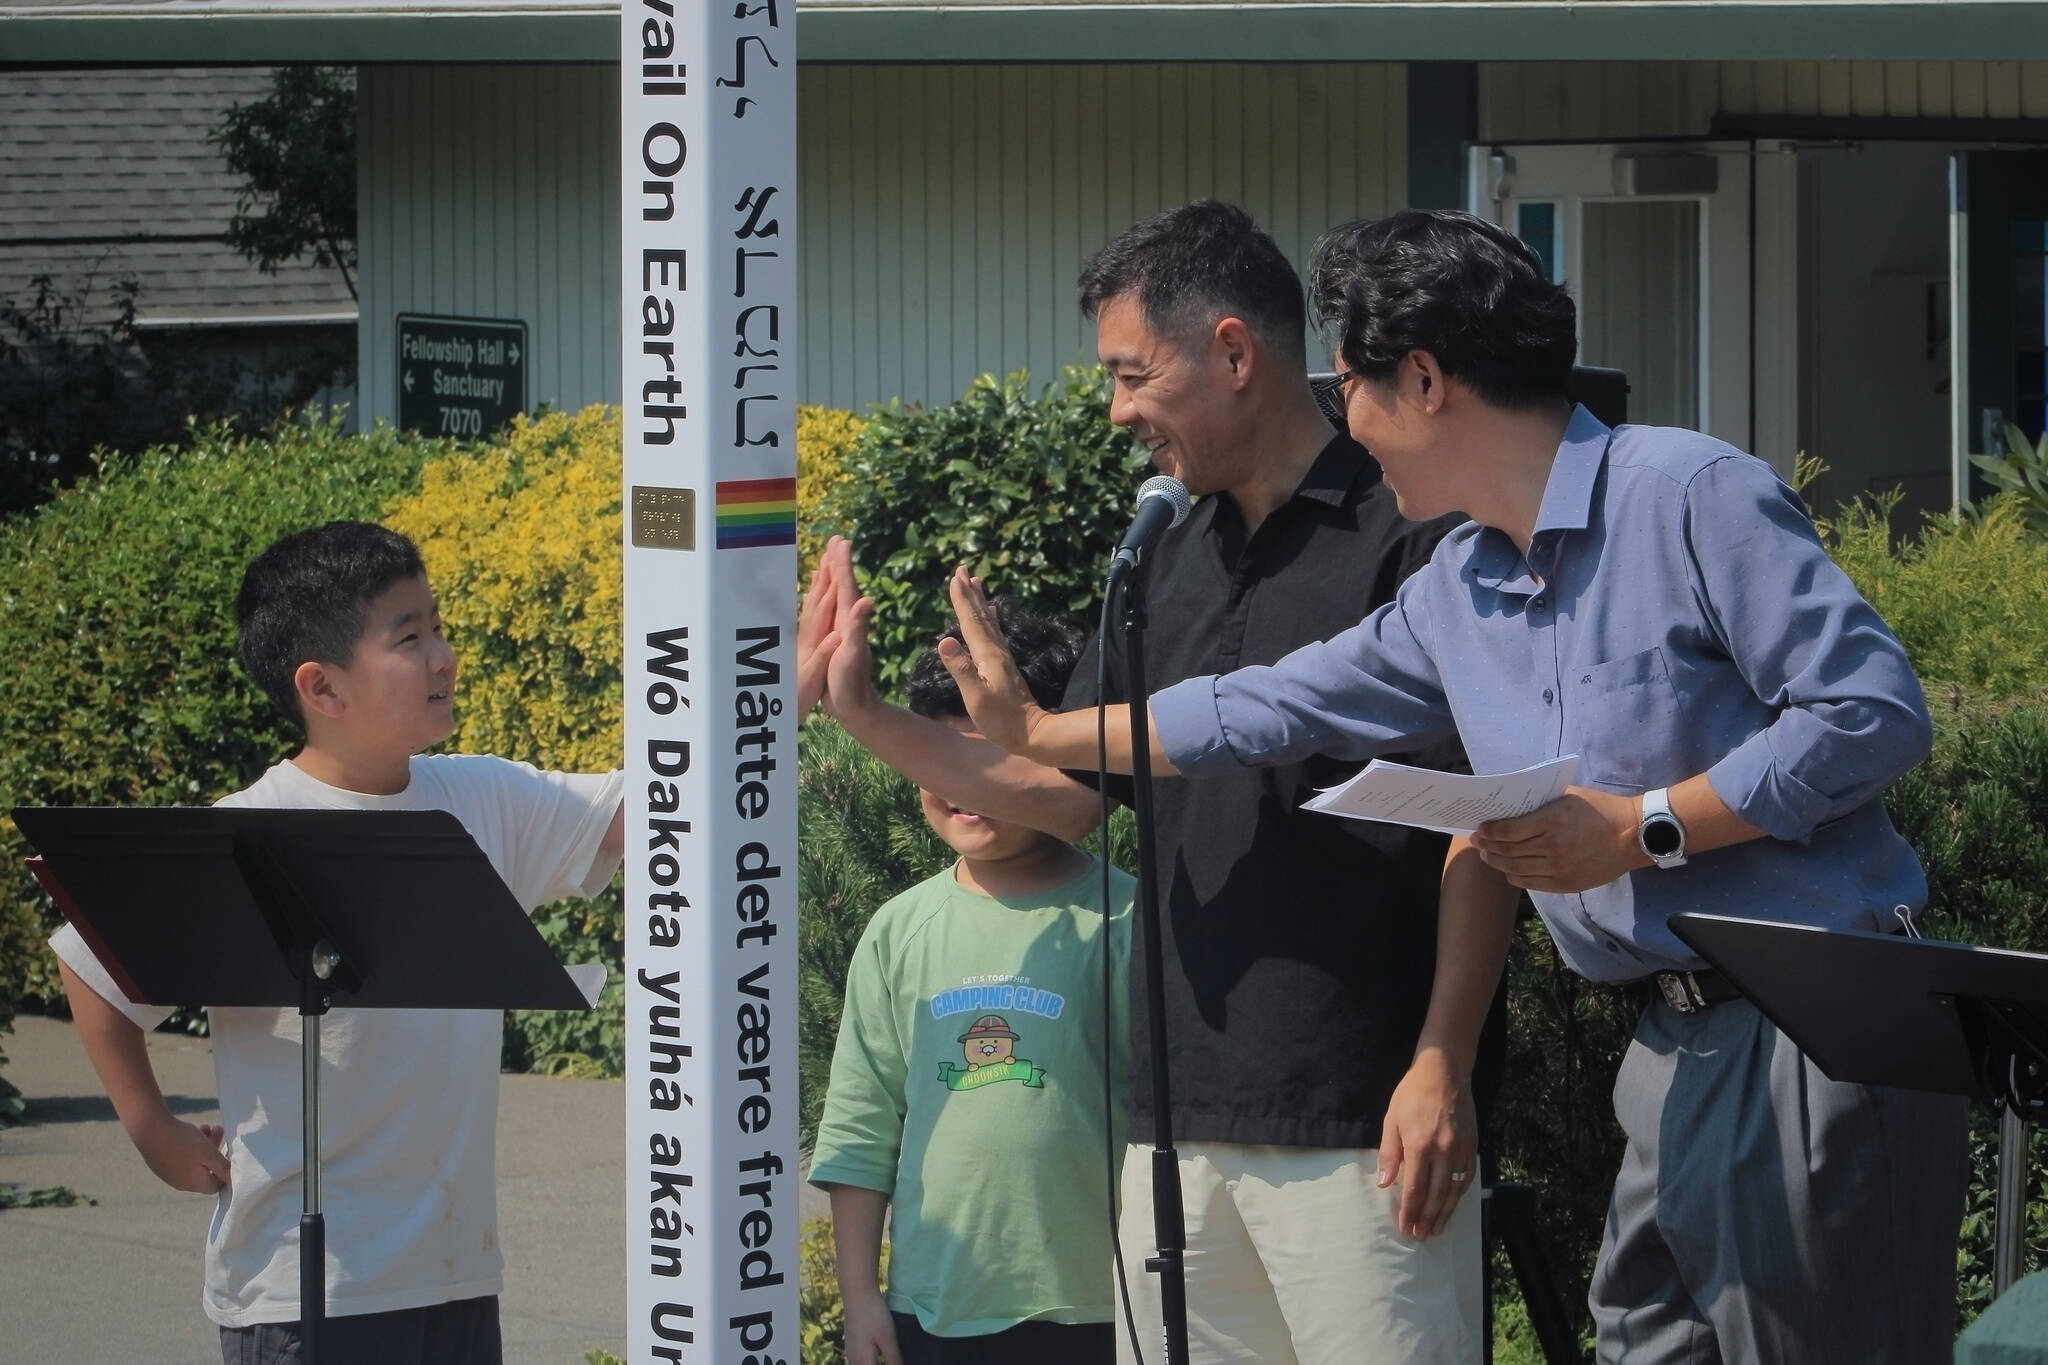 Attendees enjoy their time at the peace-pole installation and dedication ceremony on Aug. 19 at Mercer Island United Methodist Church. Photo courtesy of Brooks Kahsai